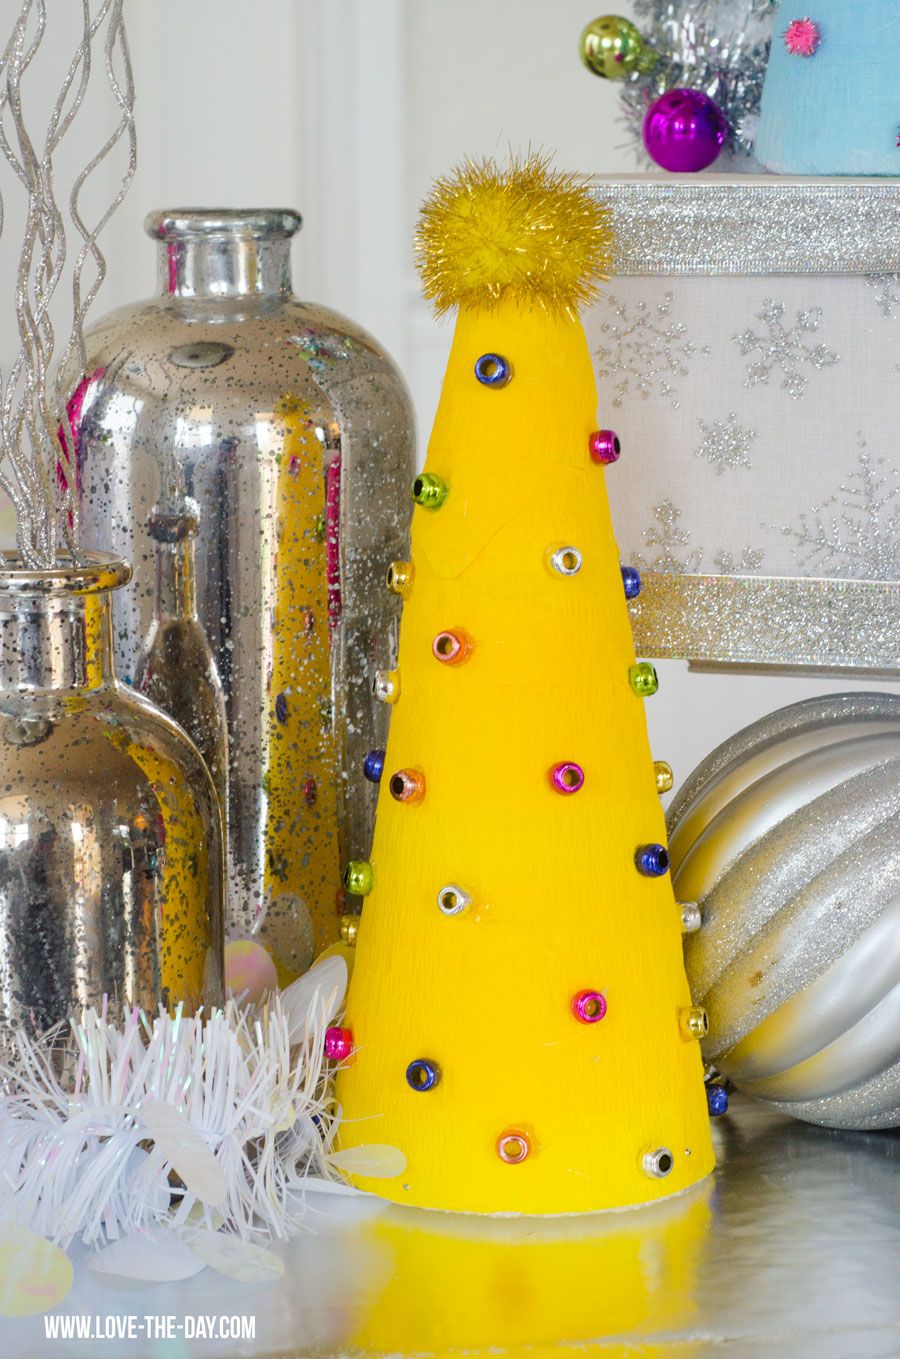 How To Decorate A Styrofoam Christmas Tree by Love The Day